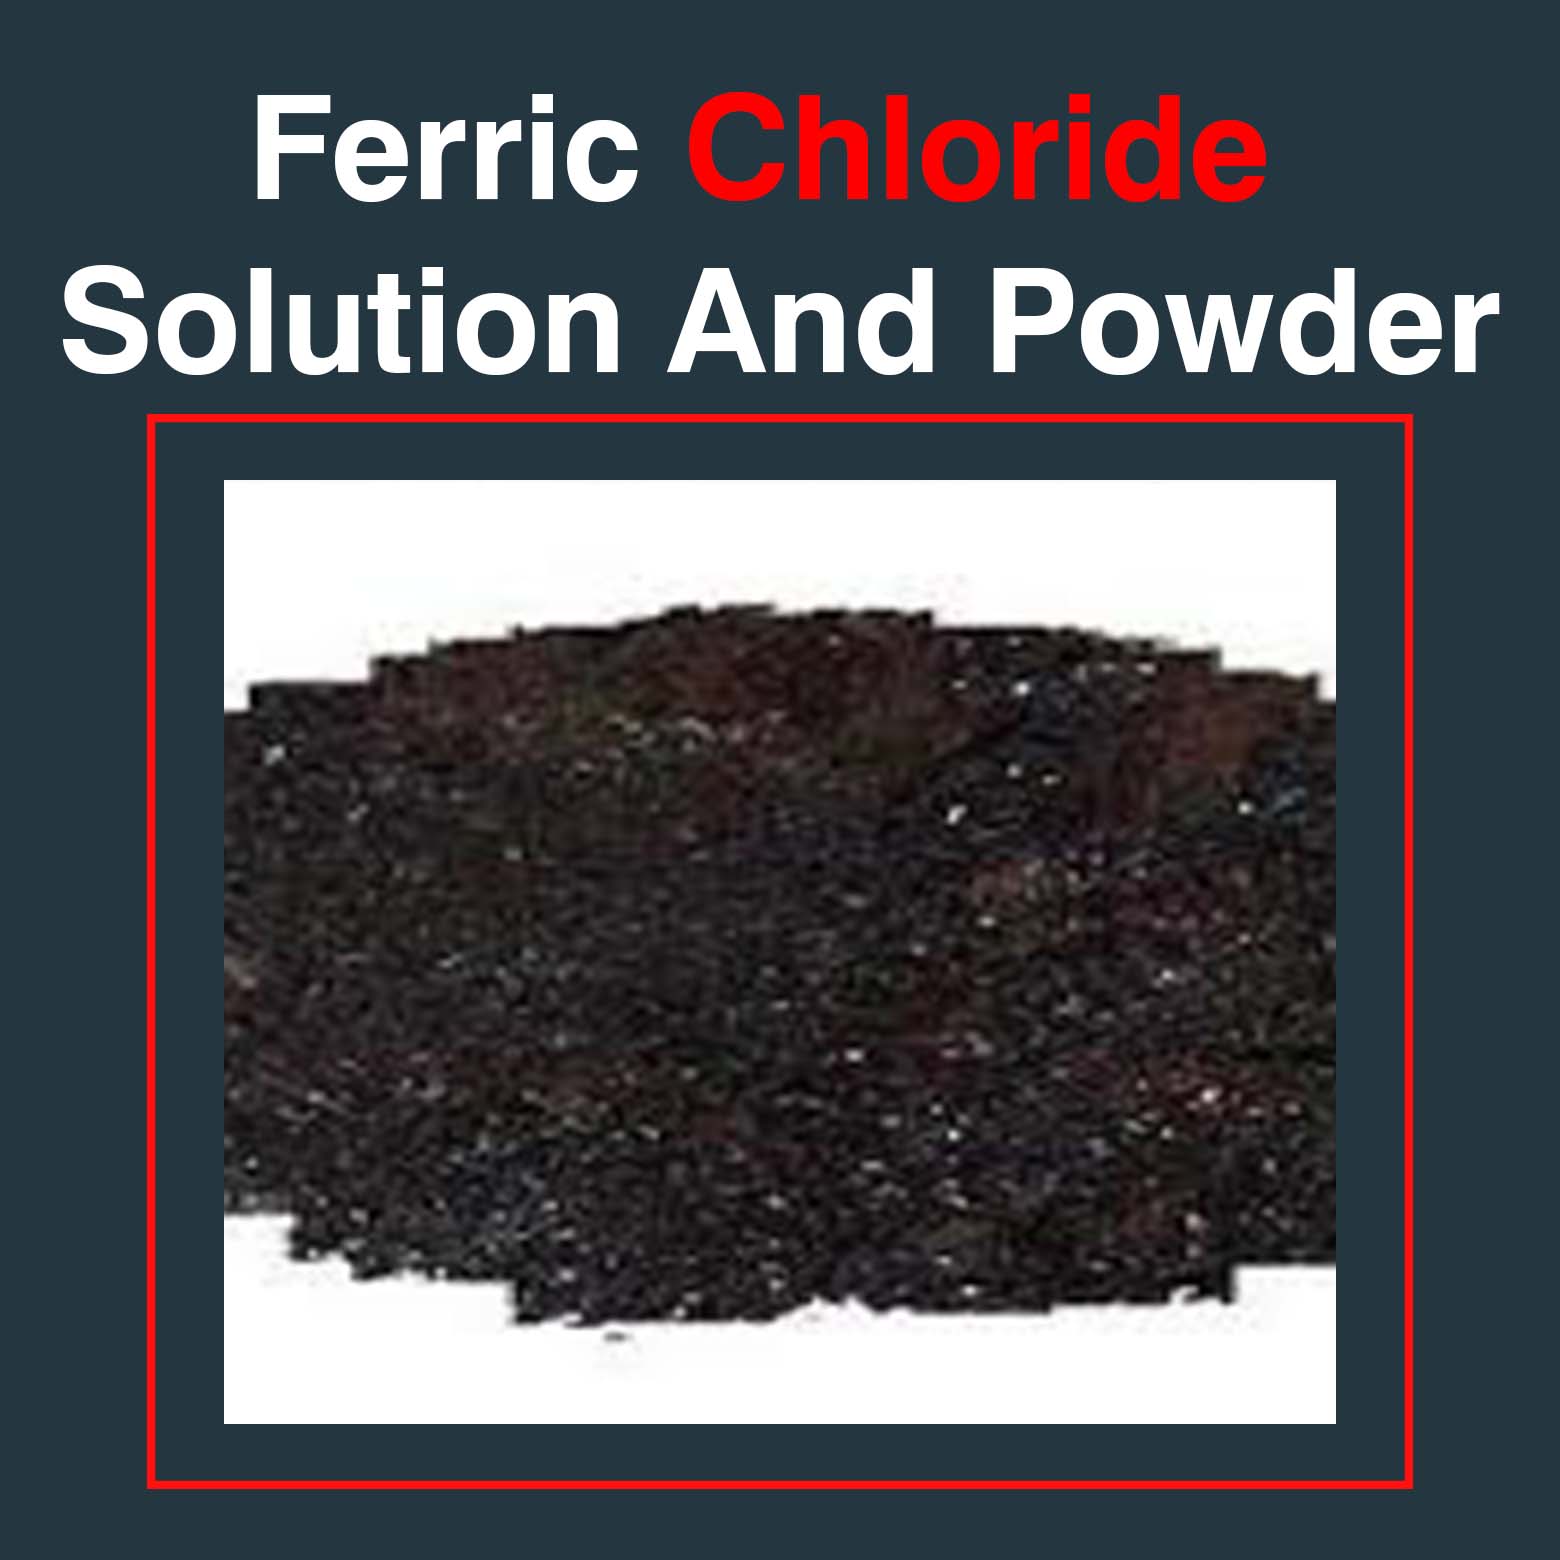 Ferric Chloride Solution And Powder